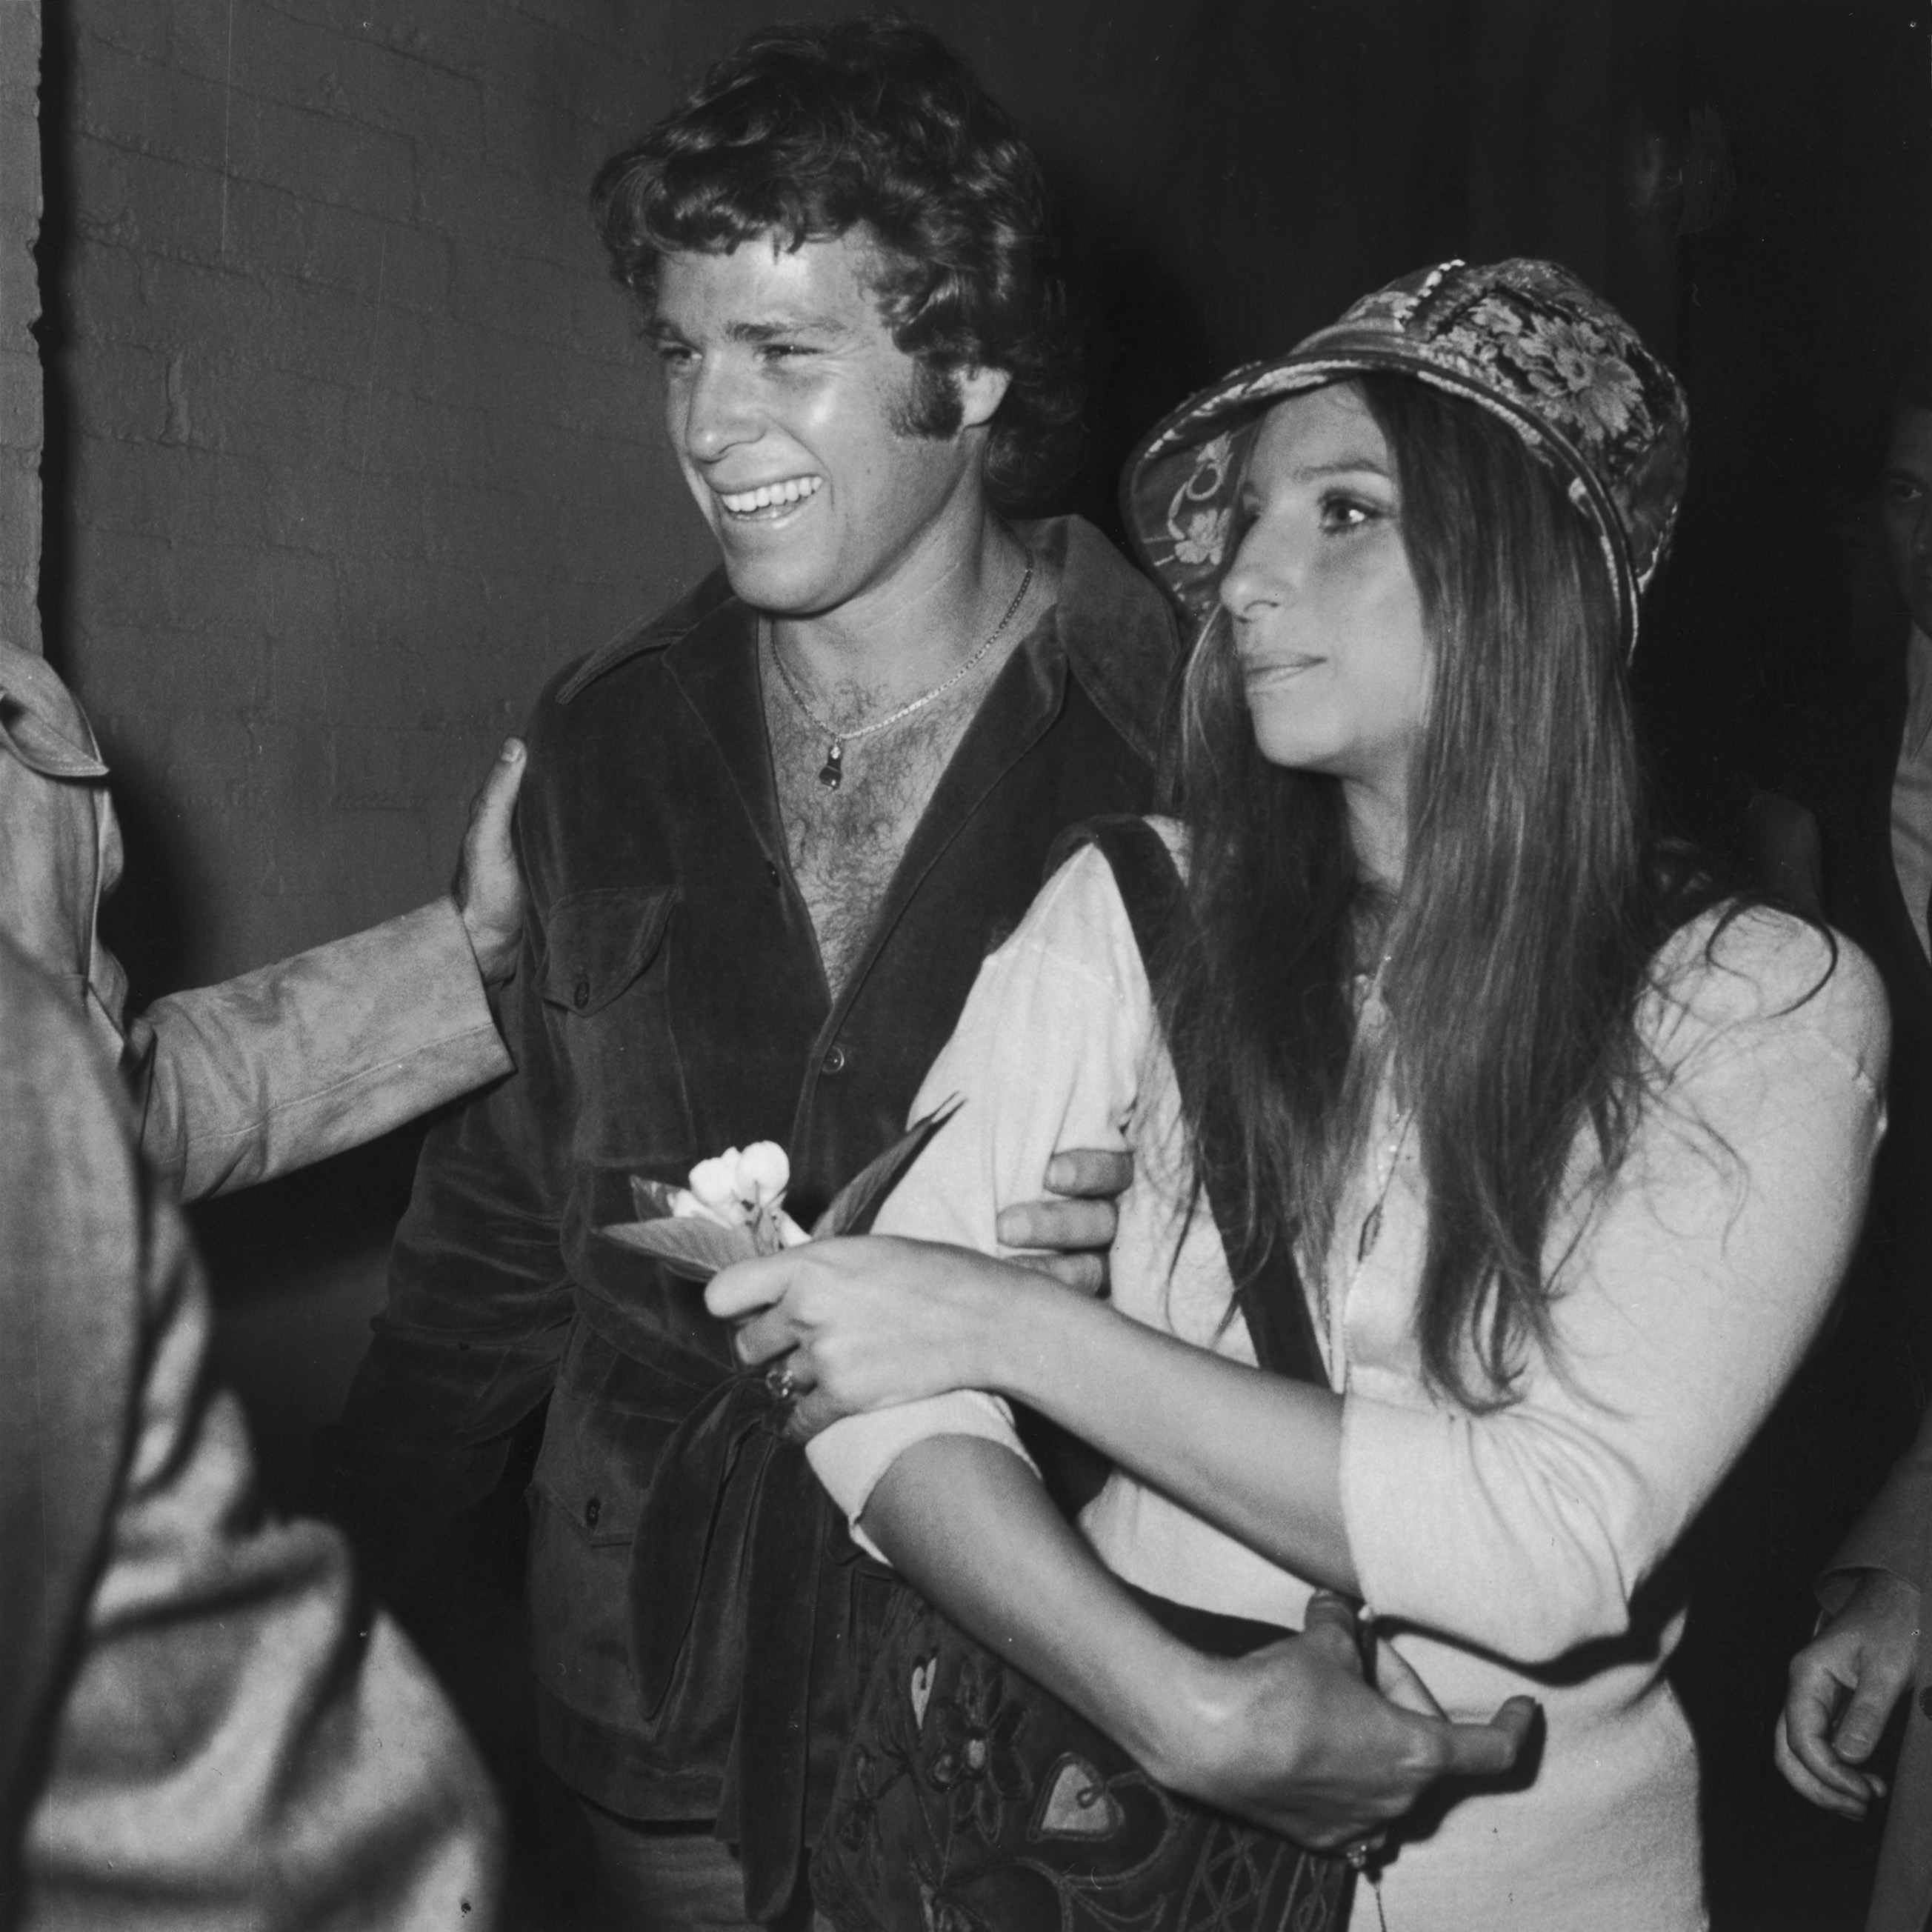 Barbra Streisand with actor Ryan O'Neal at a screening of the film "Wild Rovers," in which O'Neal starred, June 1971 | Source: Getty Images